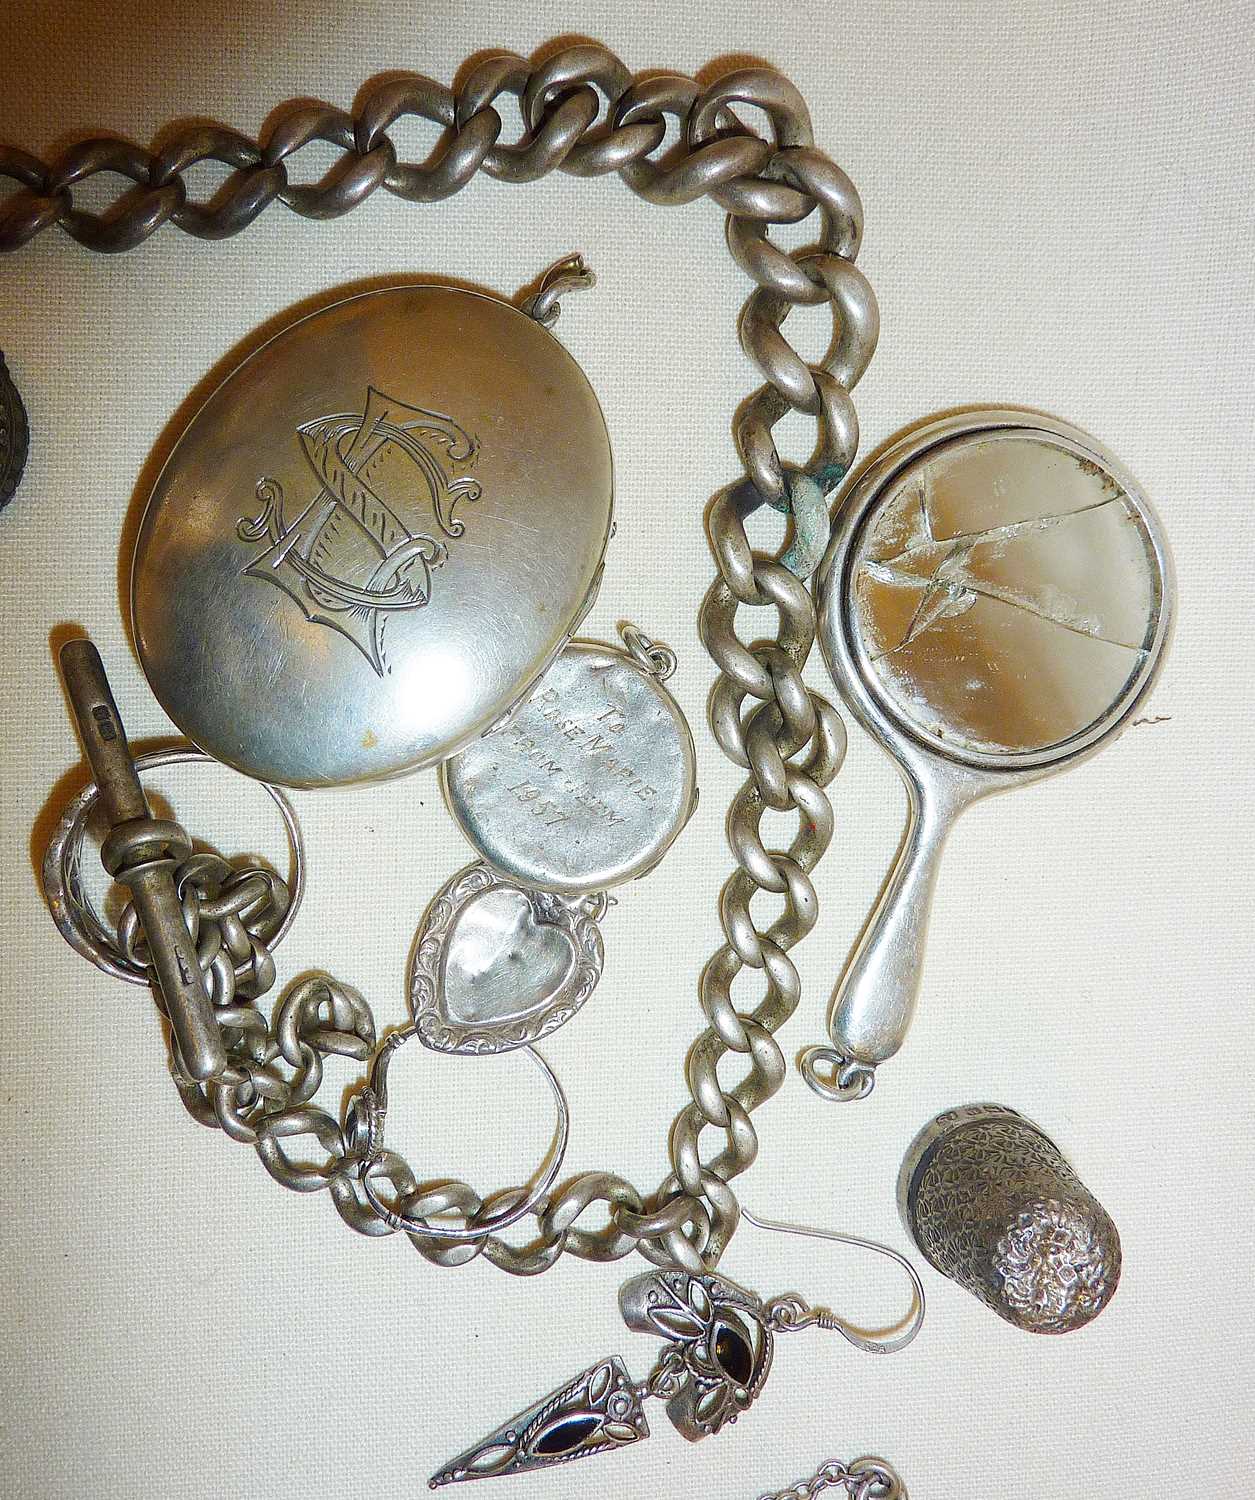 Silver jewellery, some antique, inc. an albert watch chain & compass fob (missing loop) - Image 2 of 4